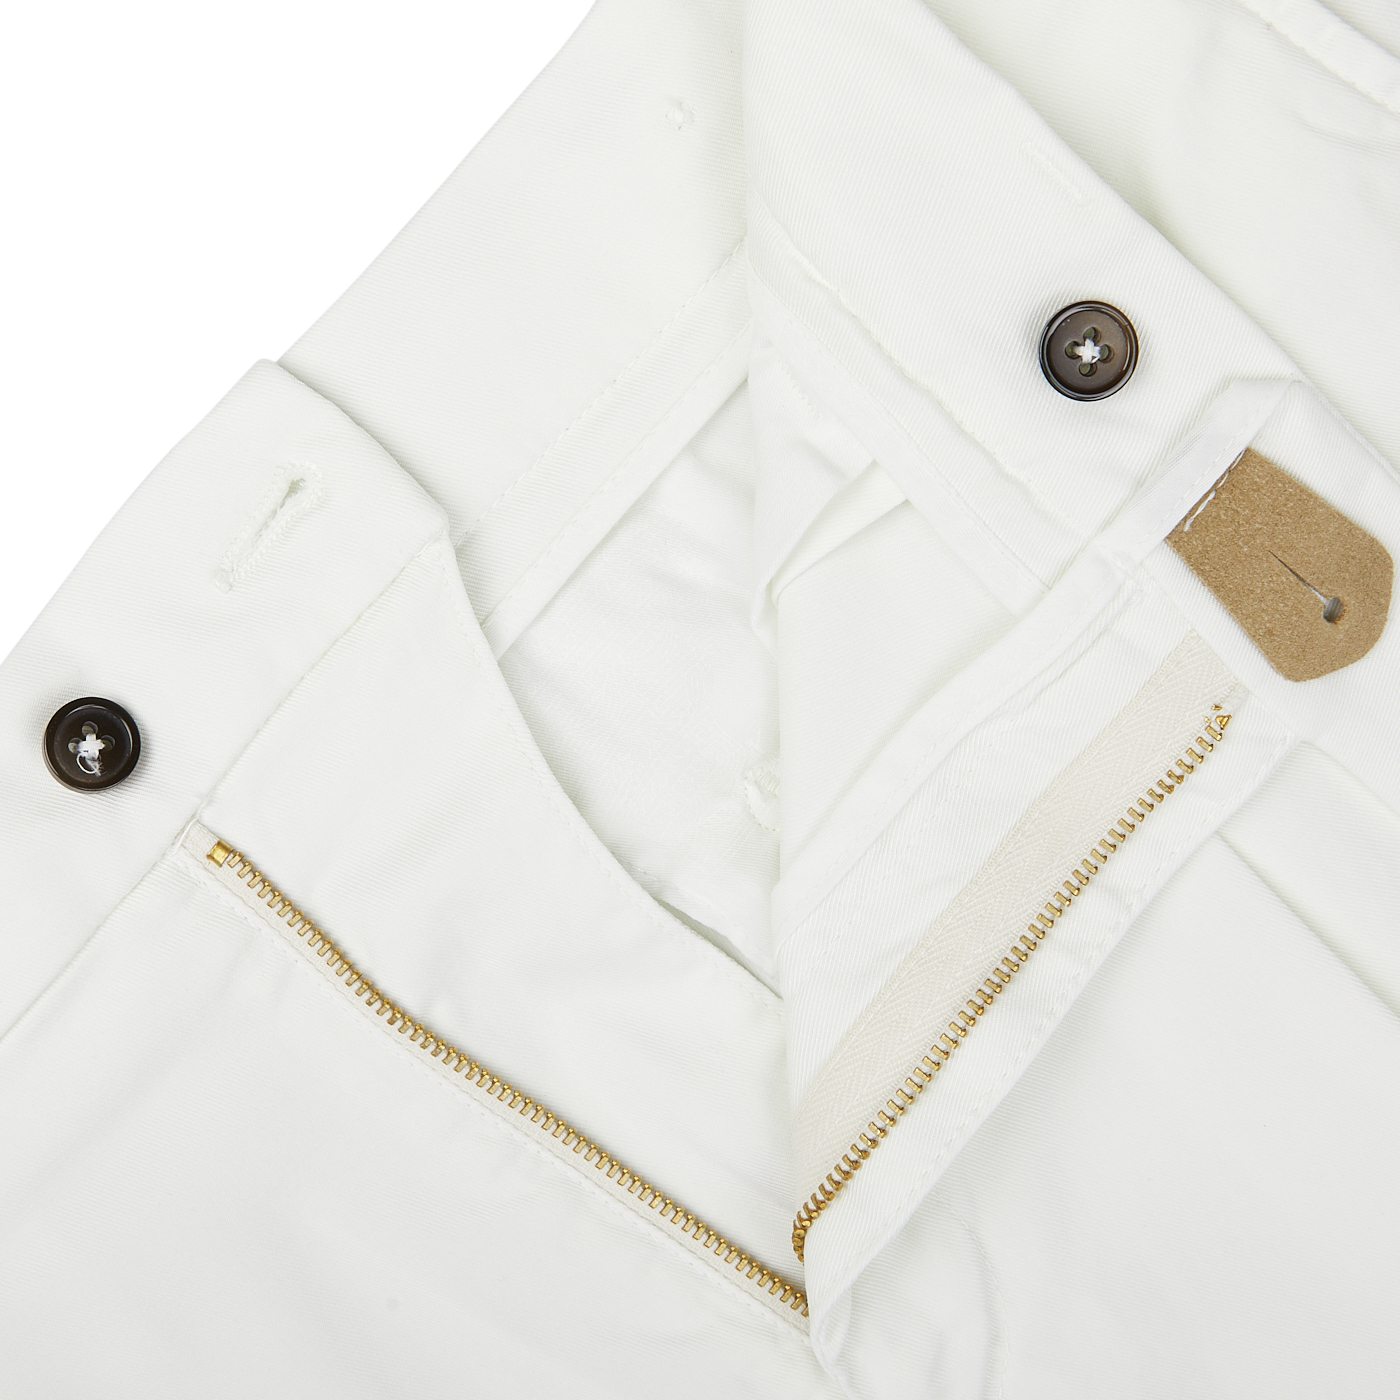 Close-up of a white Berwich jacket with a zipper, buttons, and Off-White Cotton Blend Pleated Shorts.